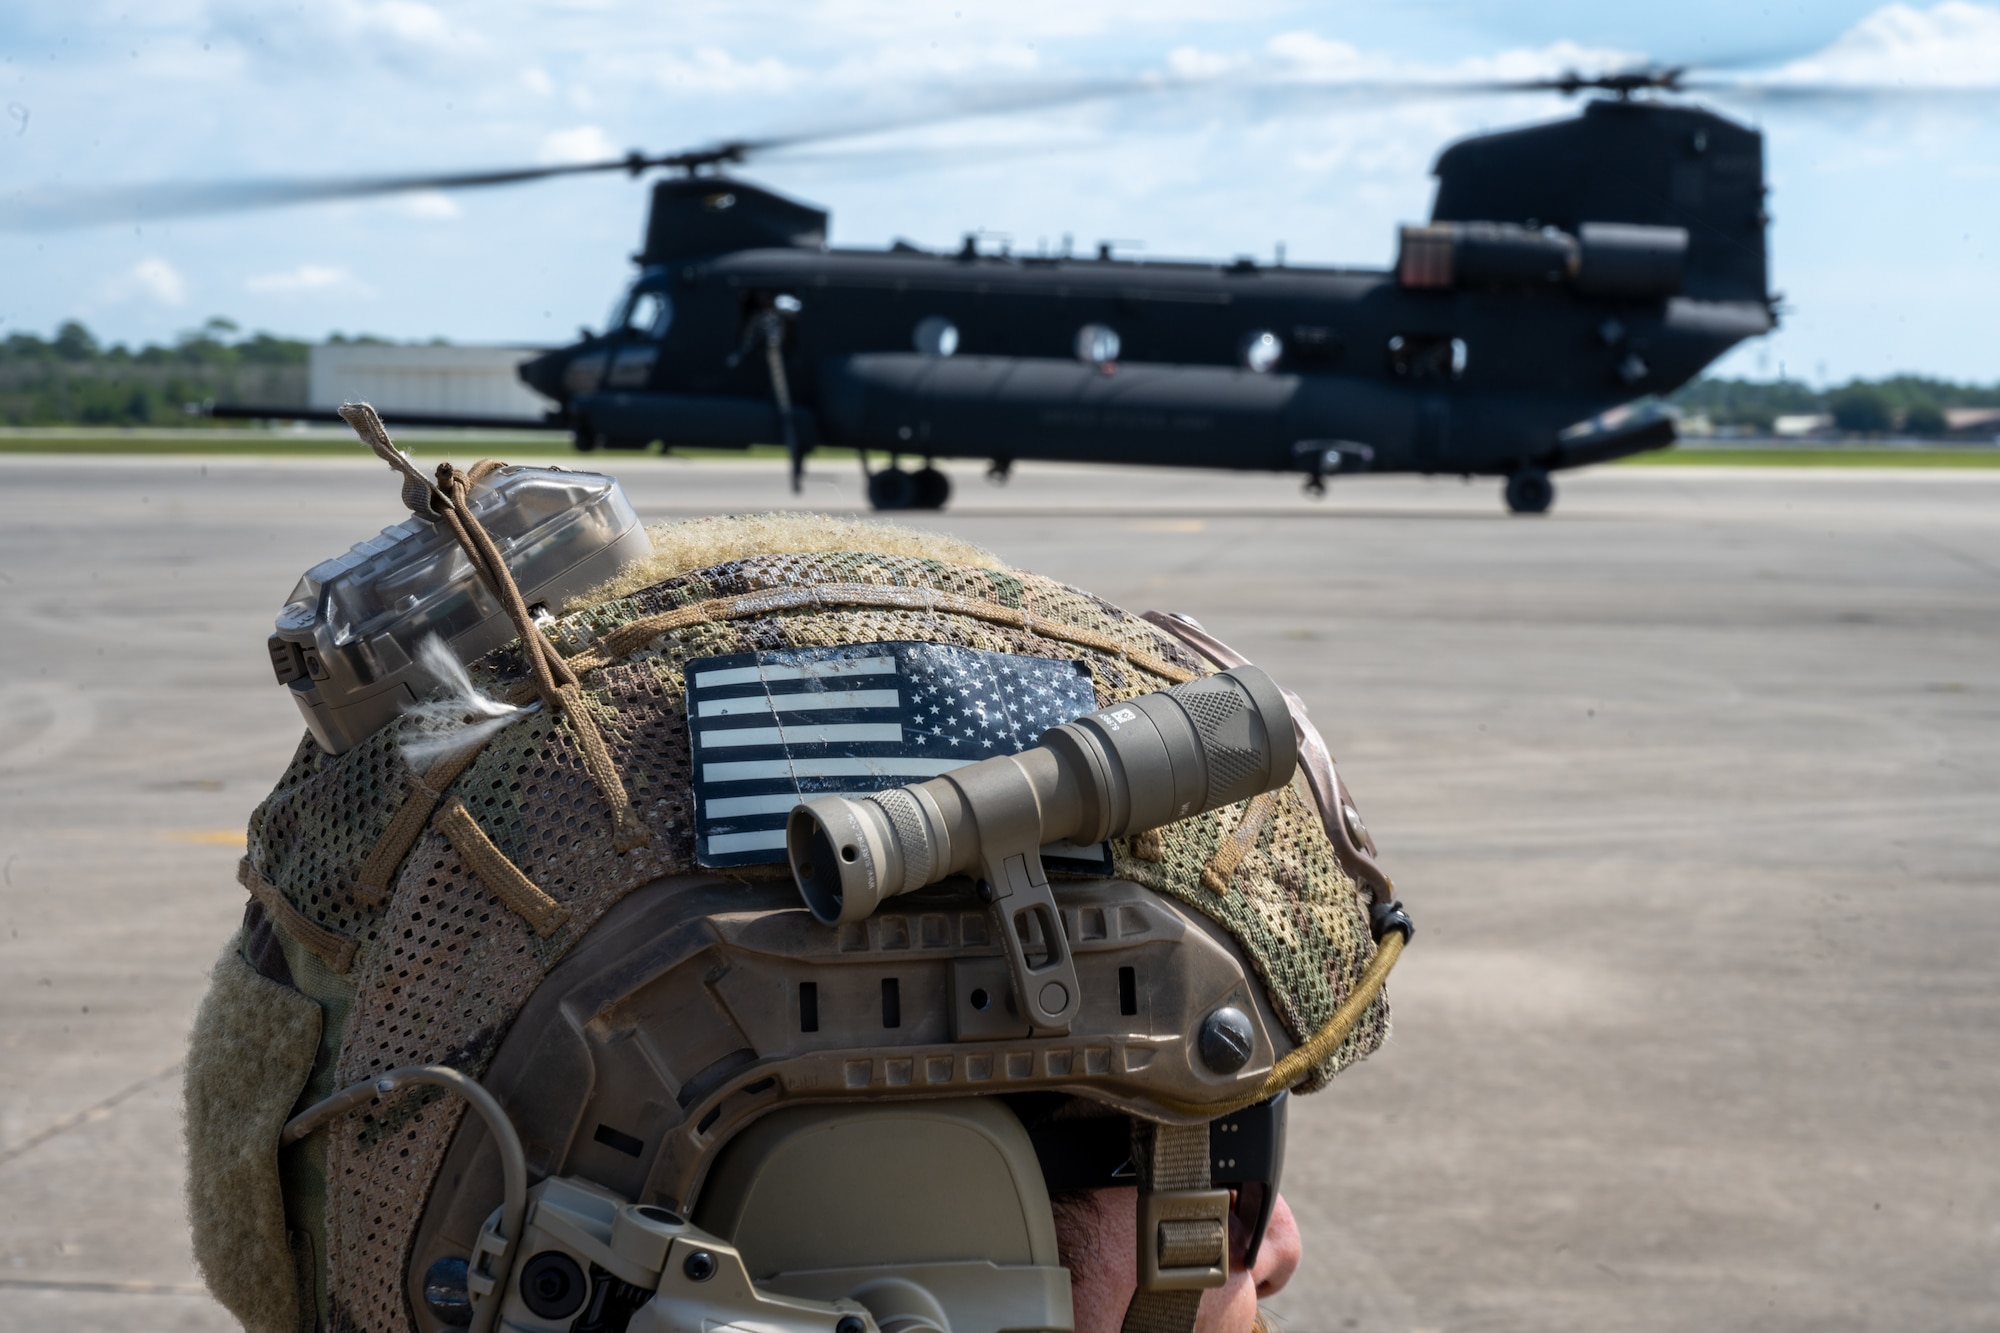 An Air Commando assigned to the 21st Special Tactics Squadron participates in an airfield establishment exercise at Hurlburt Field, Florida, Sept. 21, 2023. Members of the 21st STS jumped from an MC-130J Commando II to conduct the airfield establishment exercise during the 94th Joint Civilian Orientation Conference at Hurlburt Field. (U.S. Air Force photo by Airman 1st Class Hussein Enaya)